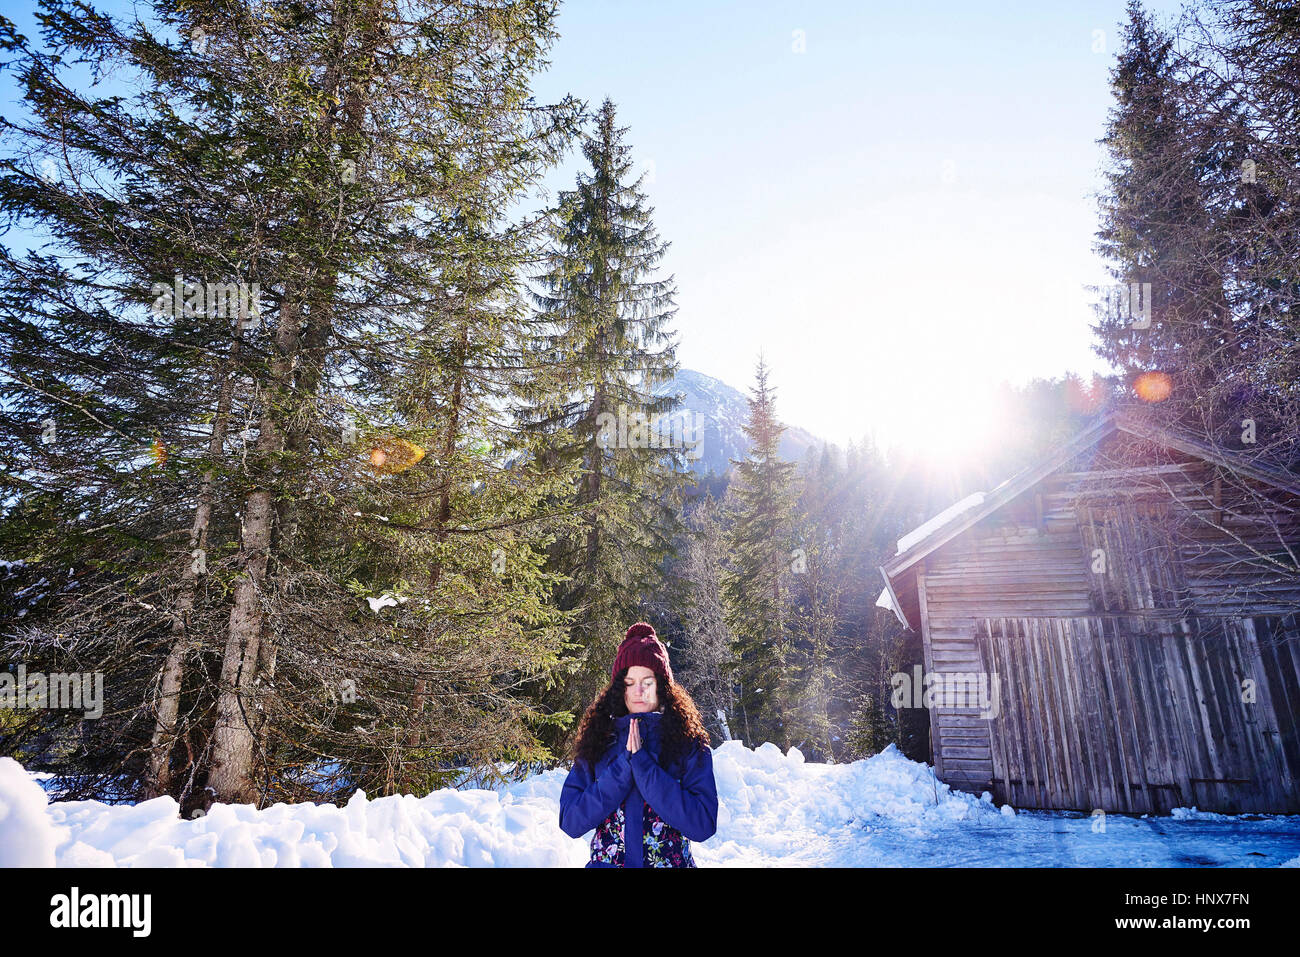 Woman practicing yoga, meditating in snowy sunlit forest, Austria Stock Photo